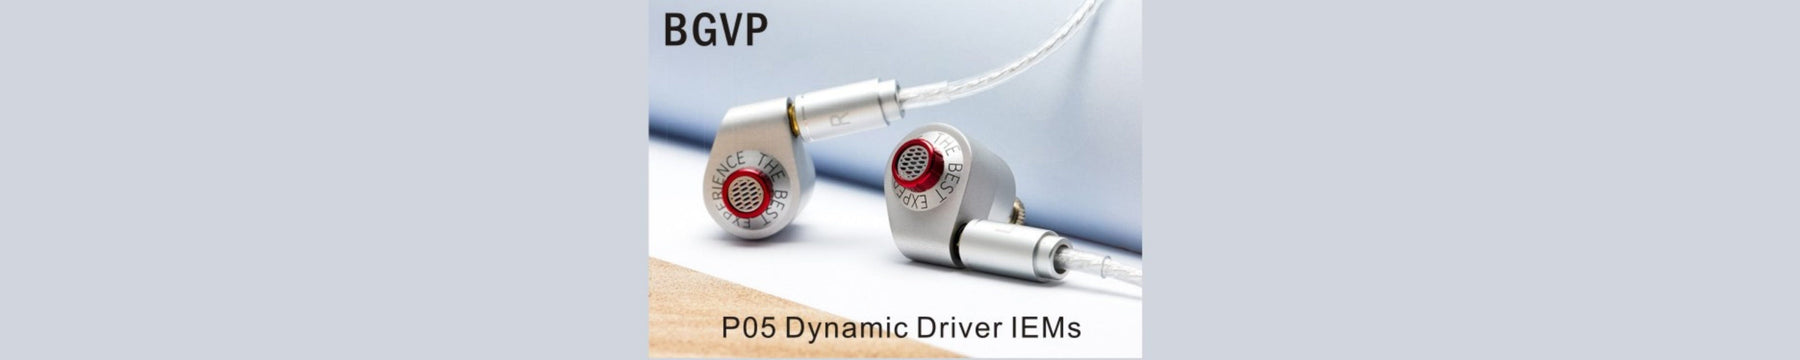 BGVP Launches P05 Single Dynamic Driver IEMs With Two Sets of Tuning Filters